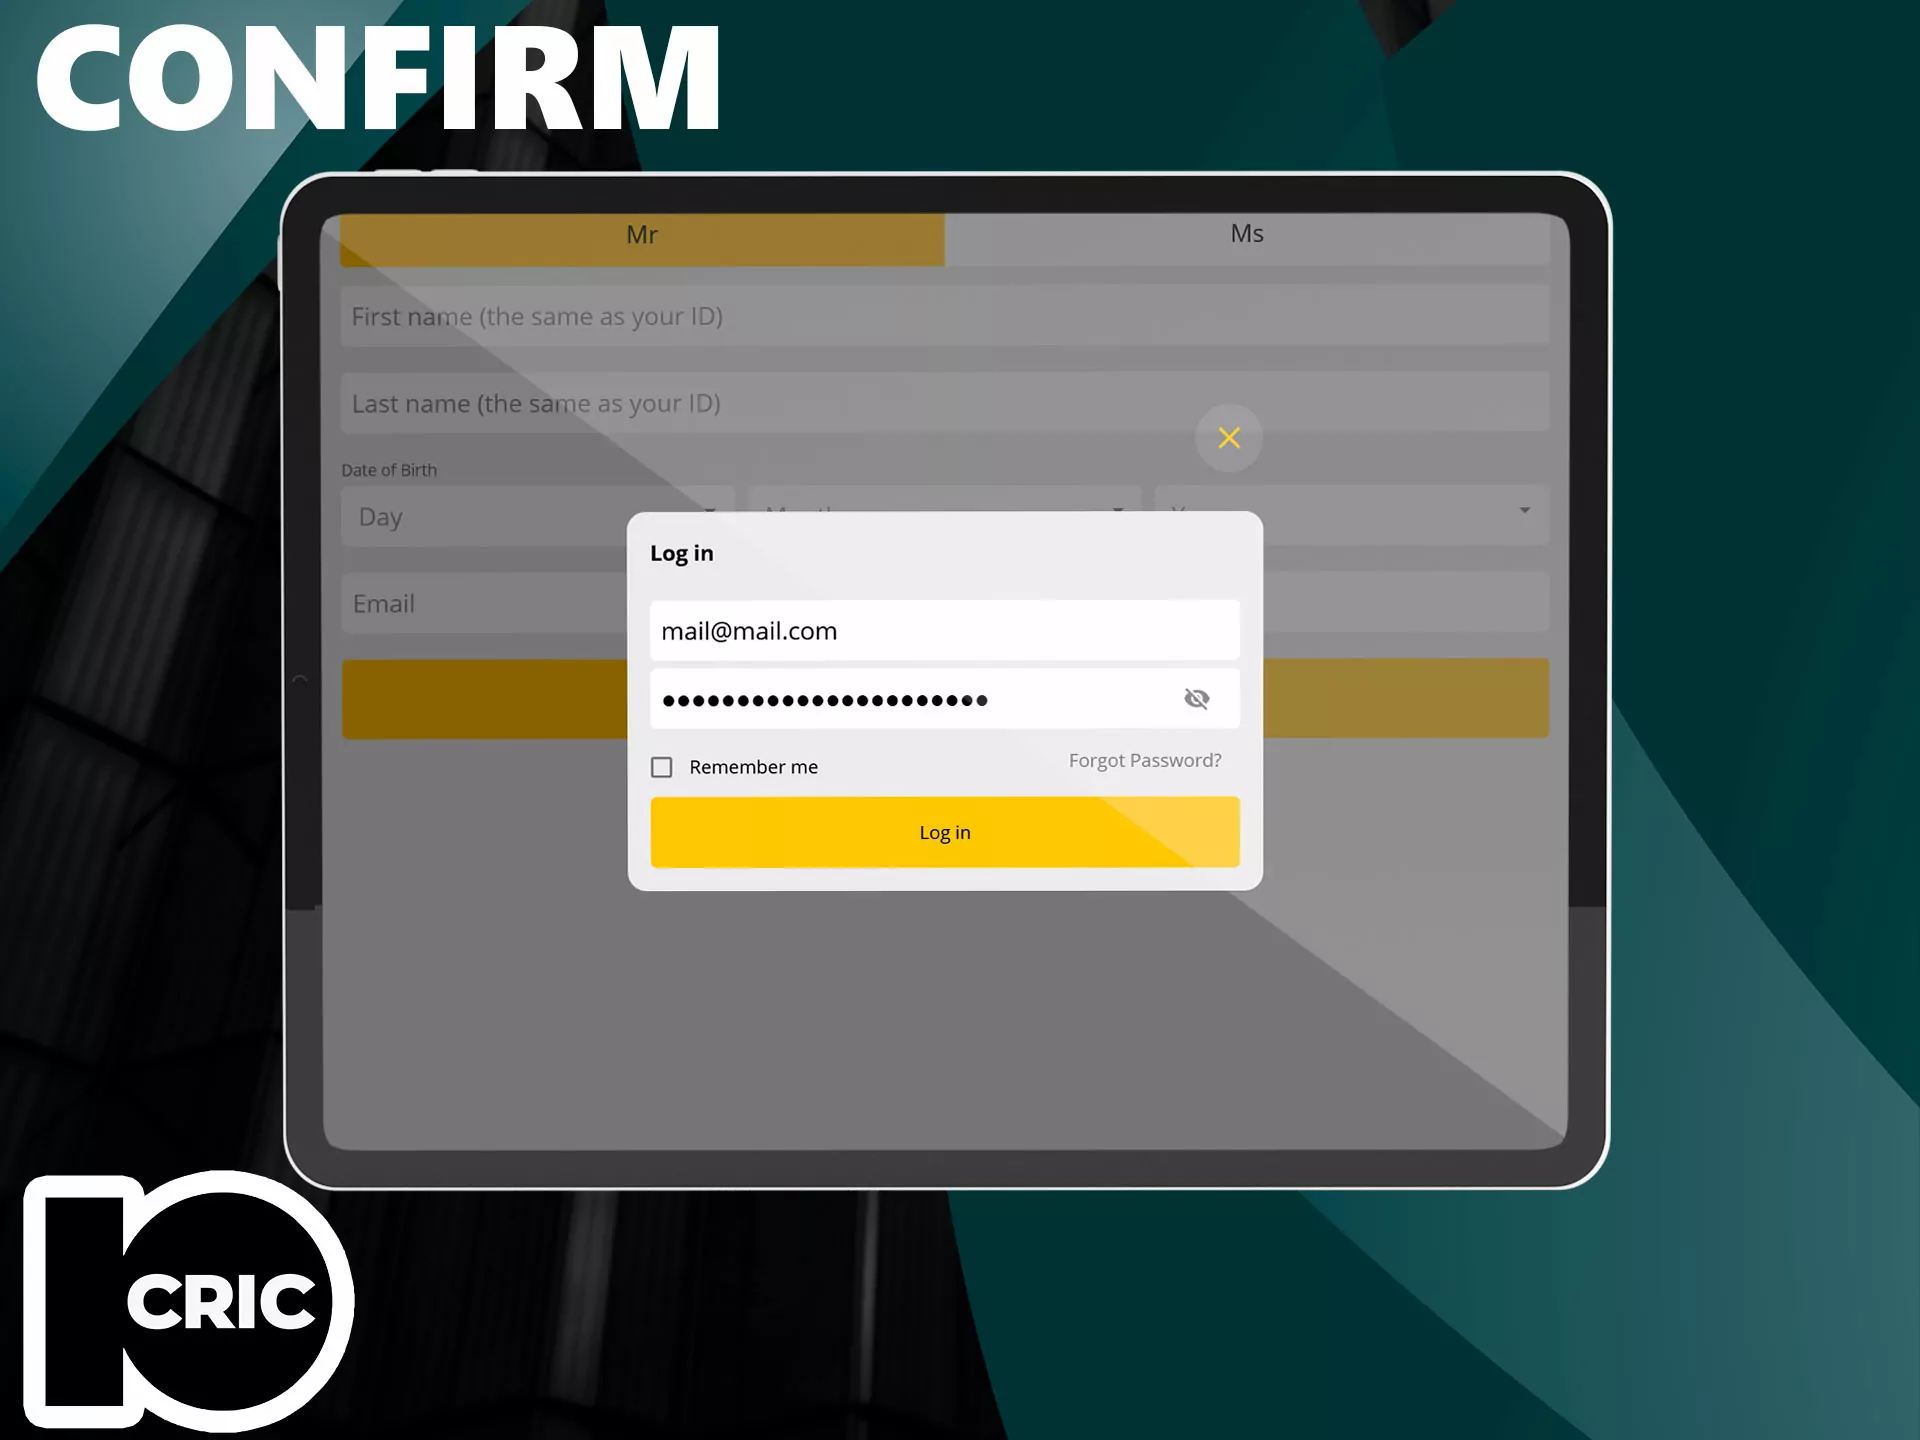 Fill your details that you used during registration to log into your account.